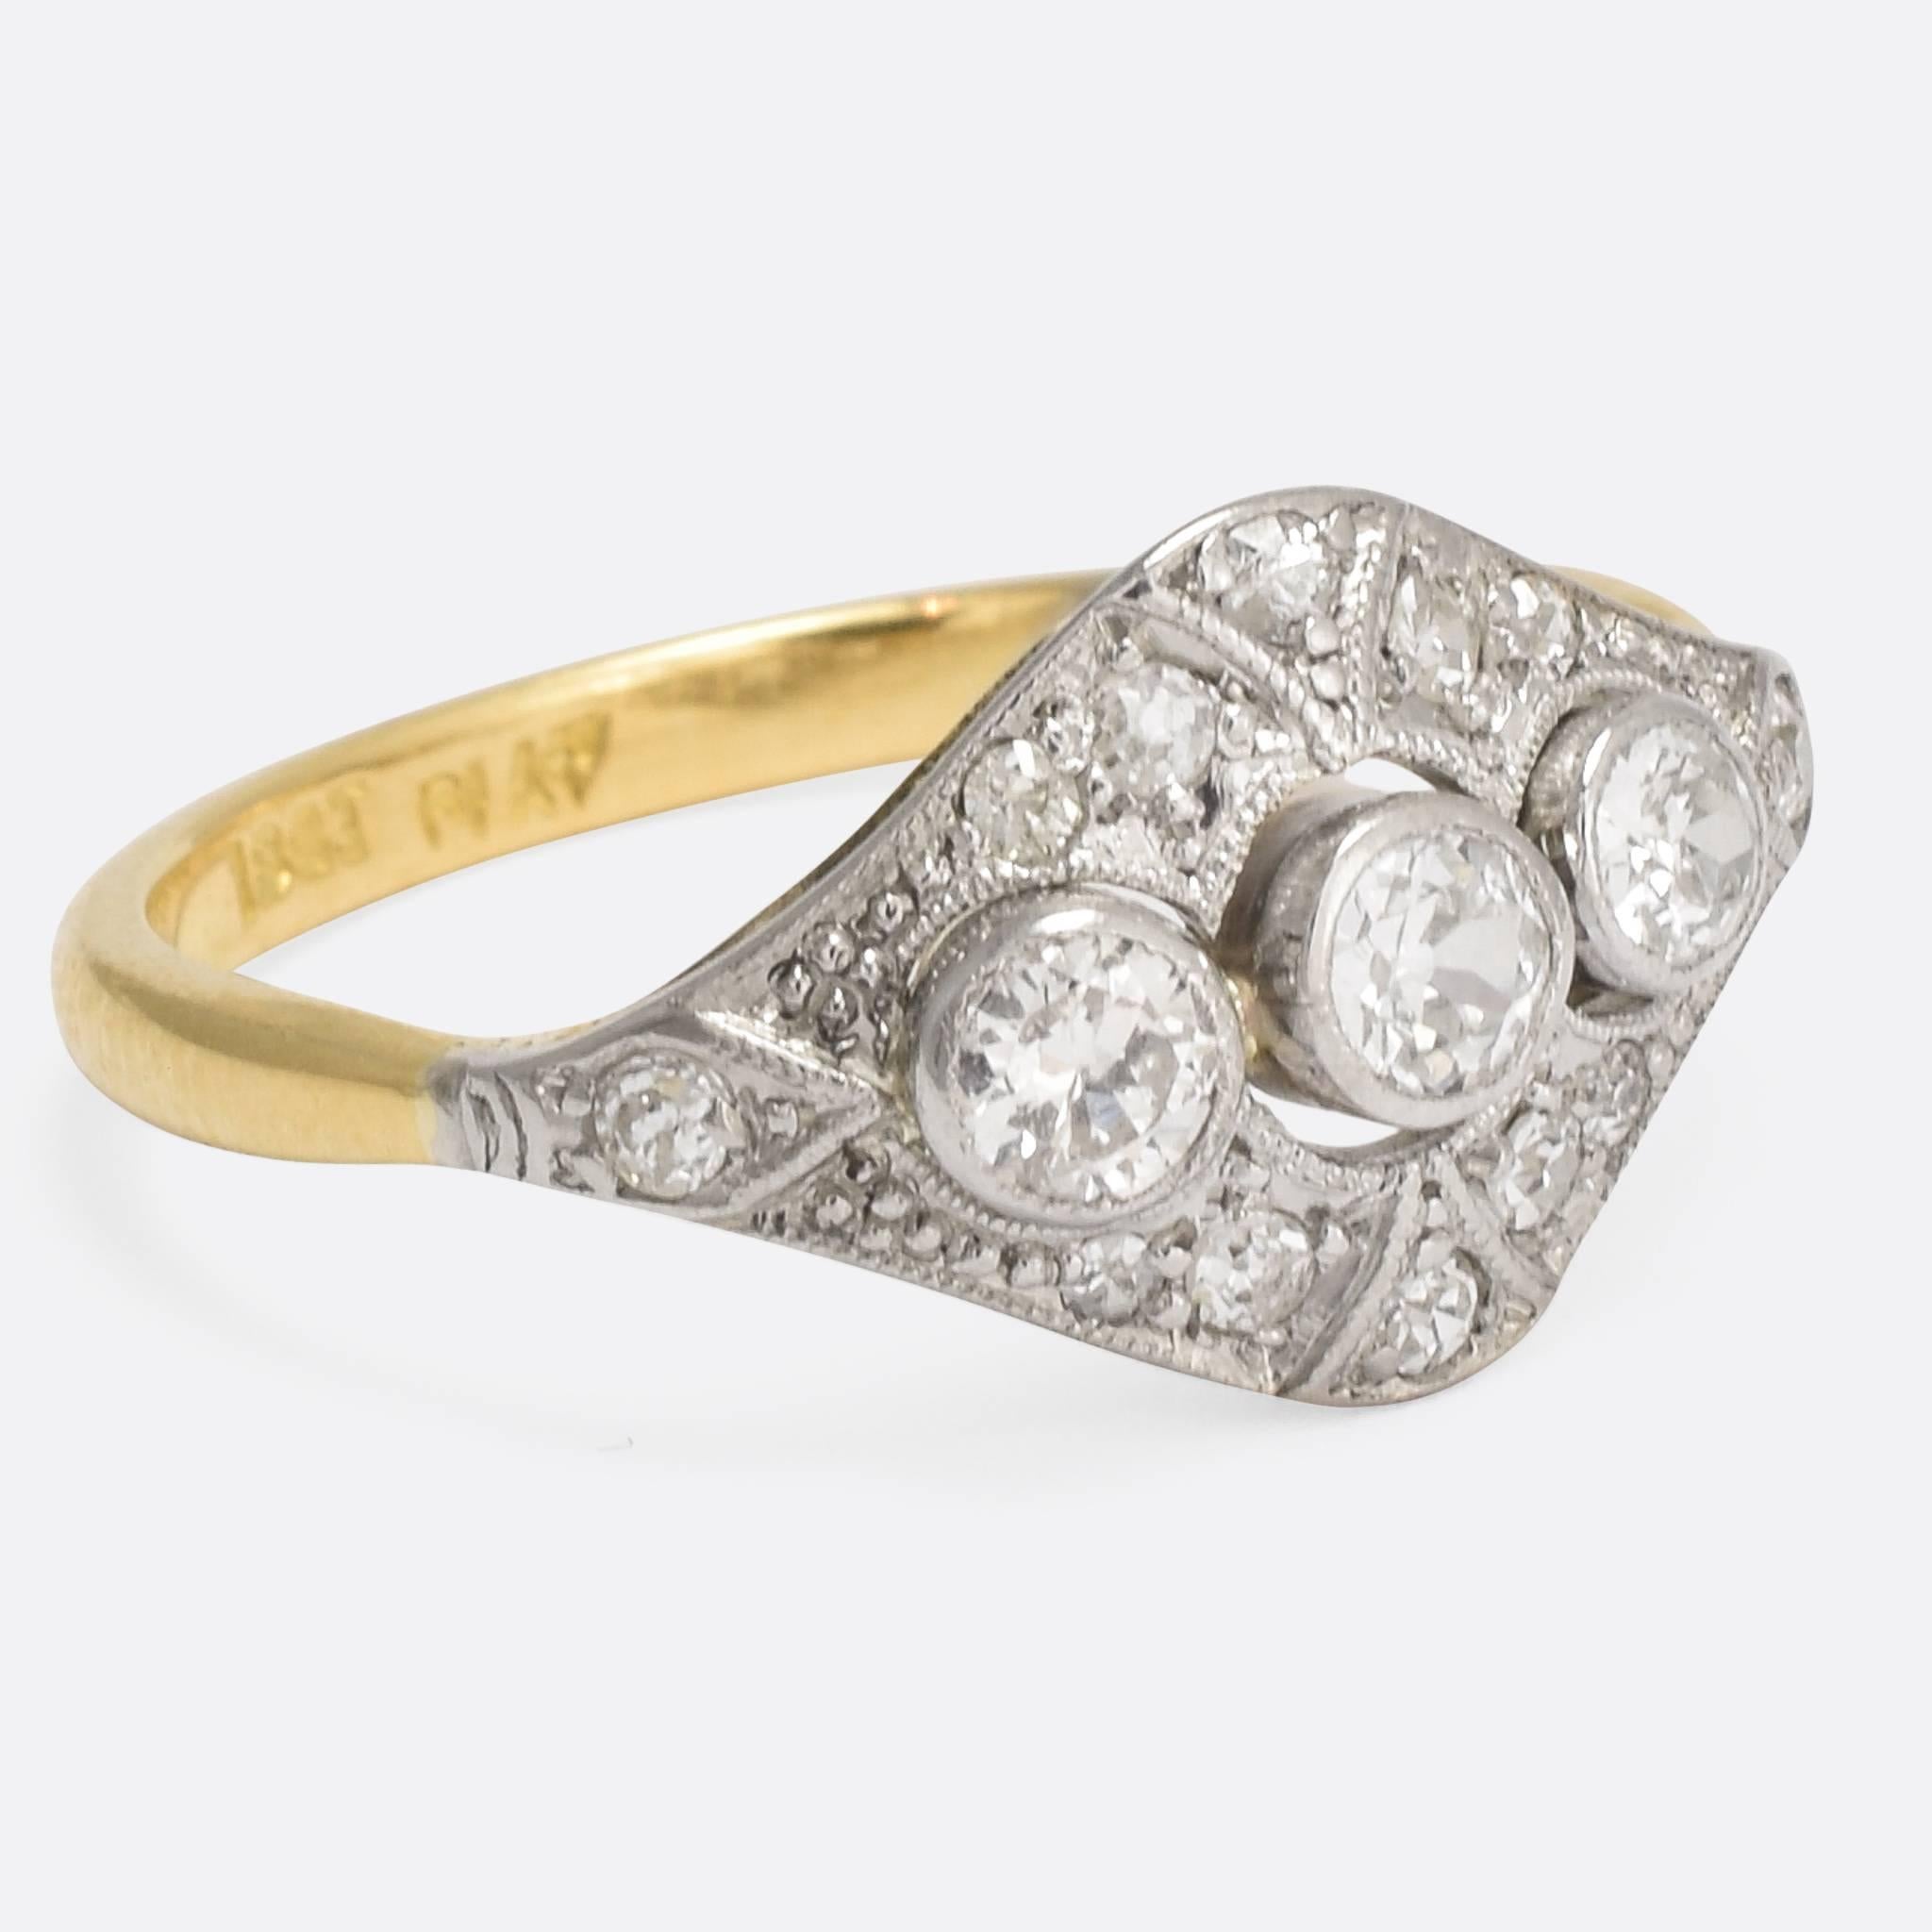 A wonderful diamond cluster ring, set with three old cut stones and and twelve eight-cuts. The head is tipped with platinum, with fine millegrain detailing, typically Deco in style, while the band is modelled in 18k gold with elegant pinched